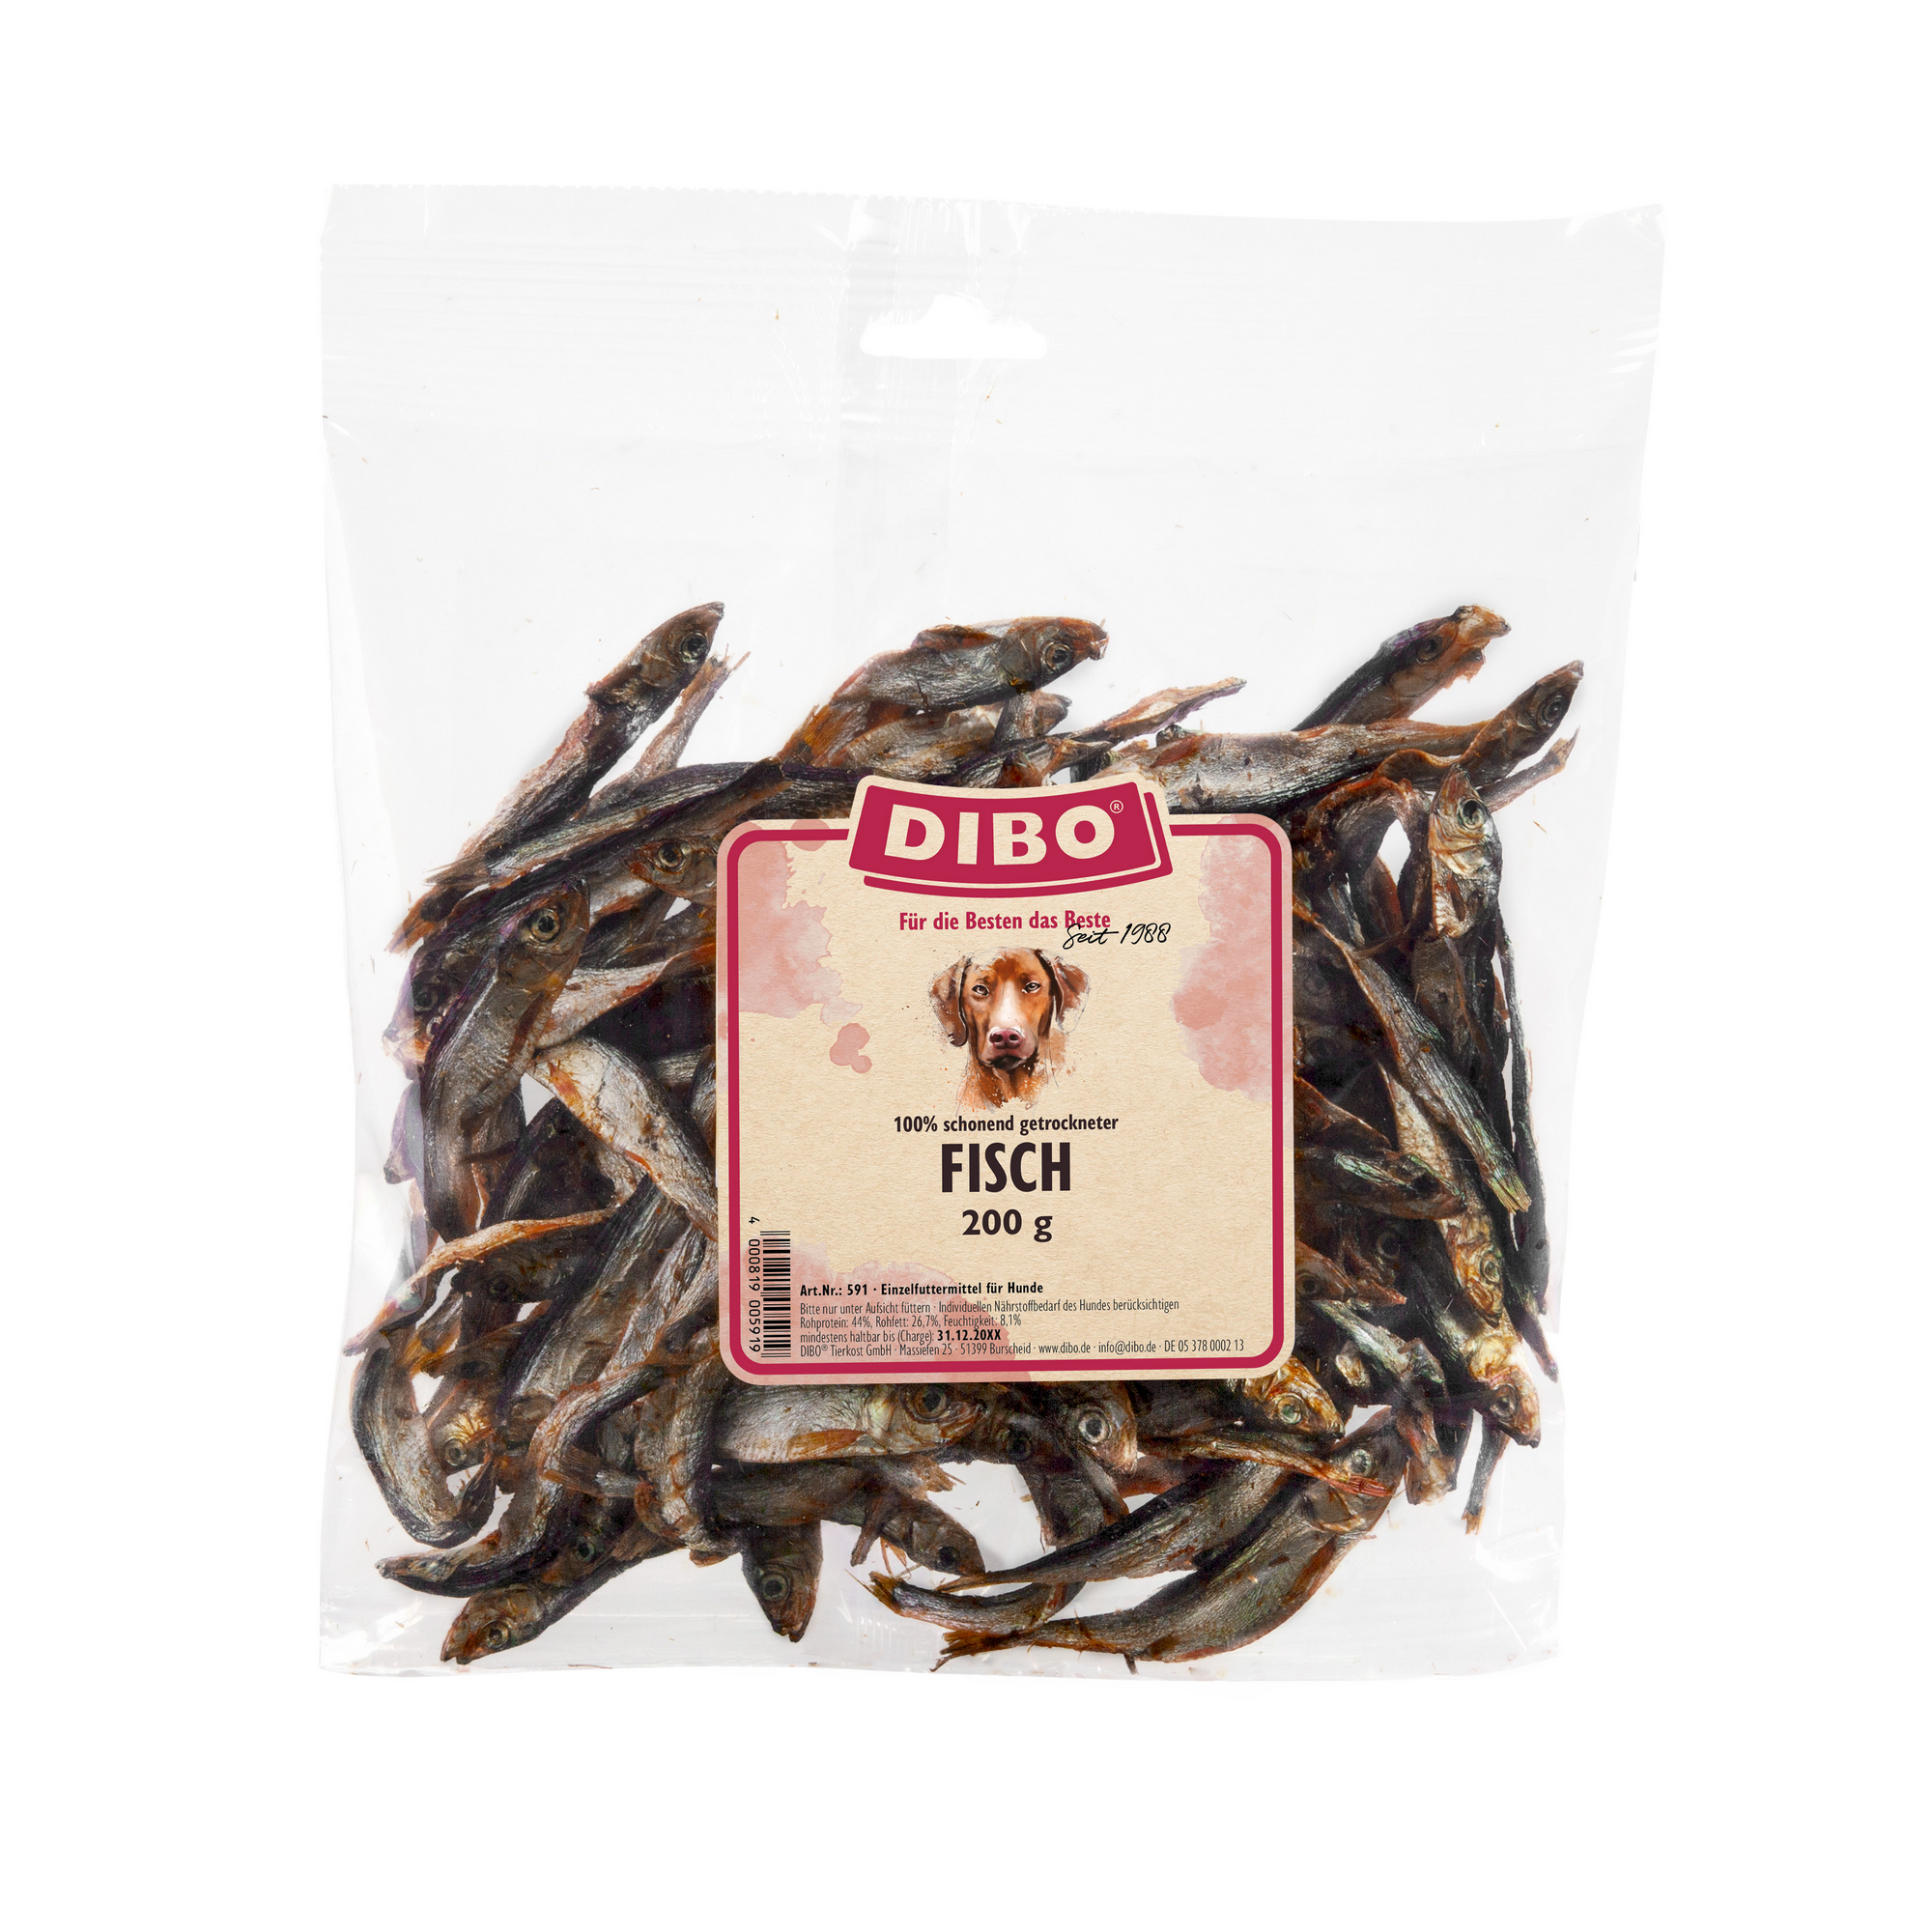 Hundesnack Fisch getrocknet 200 g + product picture